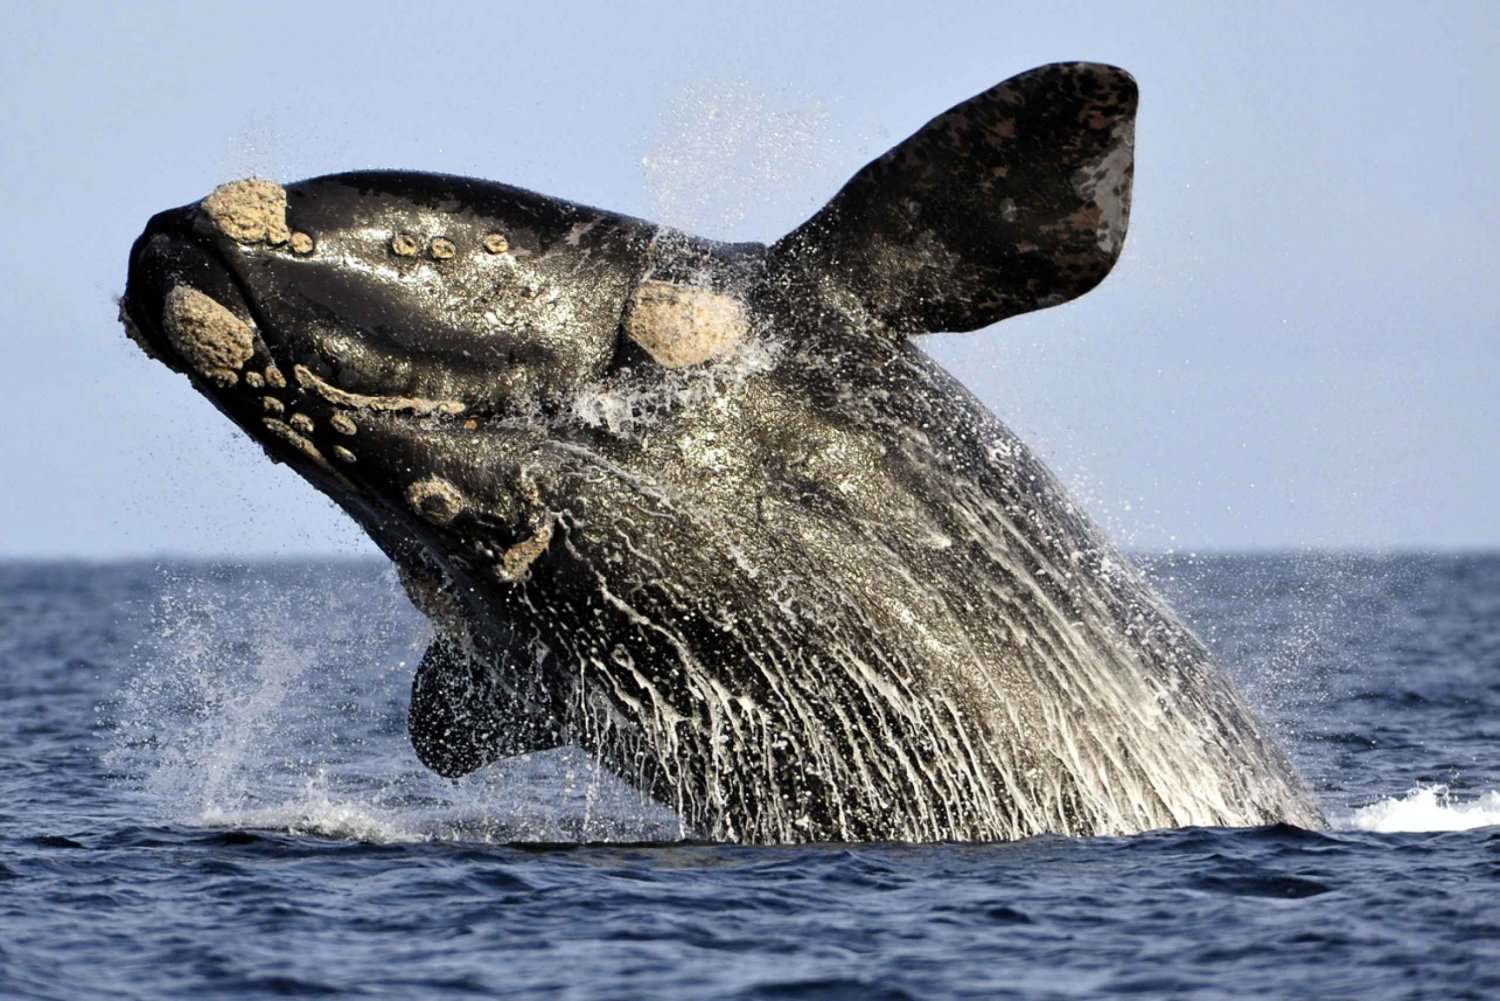 From Cape Town: Whale Watching Tour in Hermanus and Gansbaai